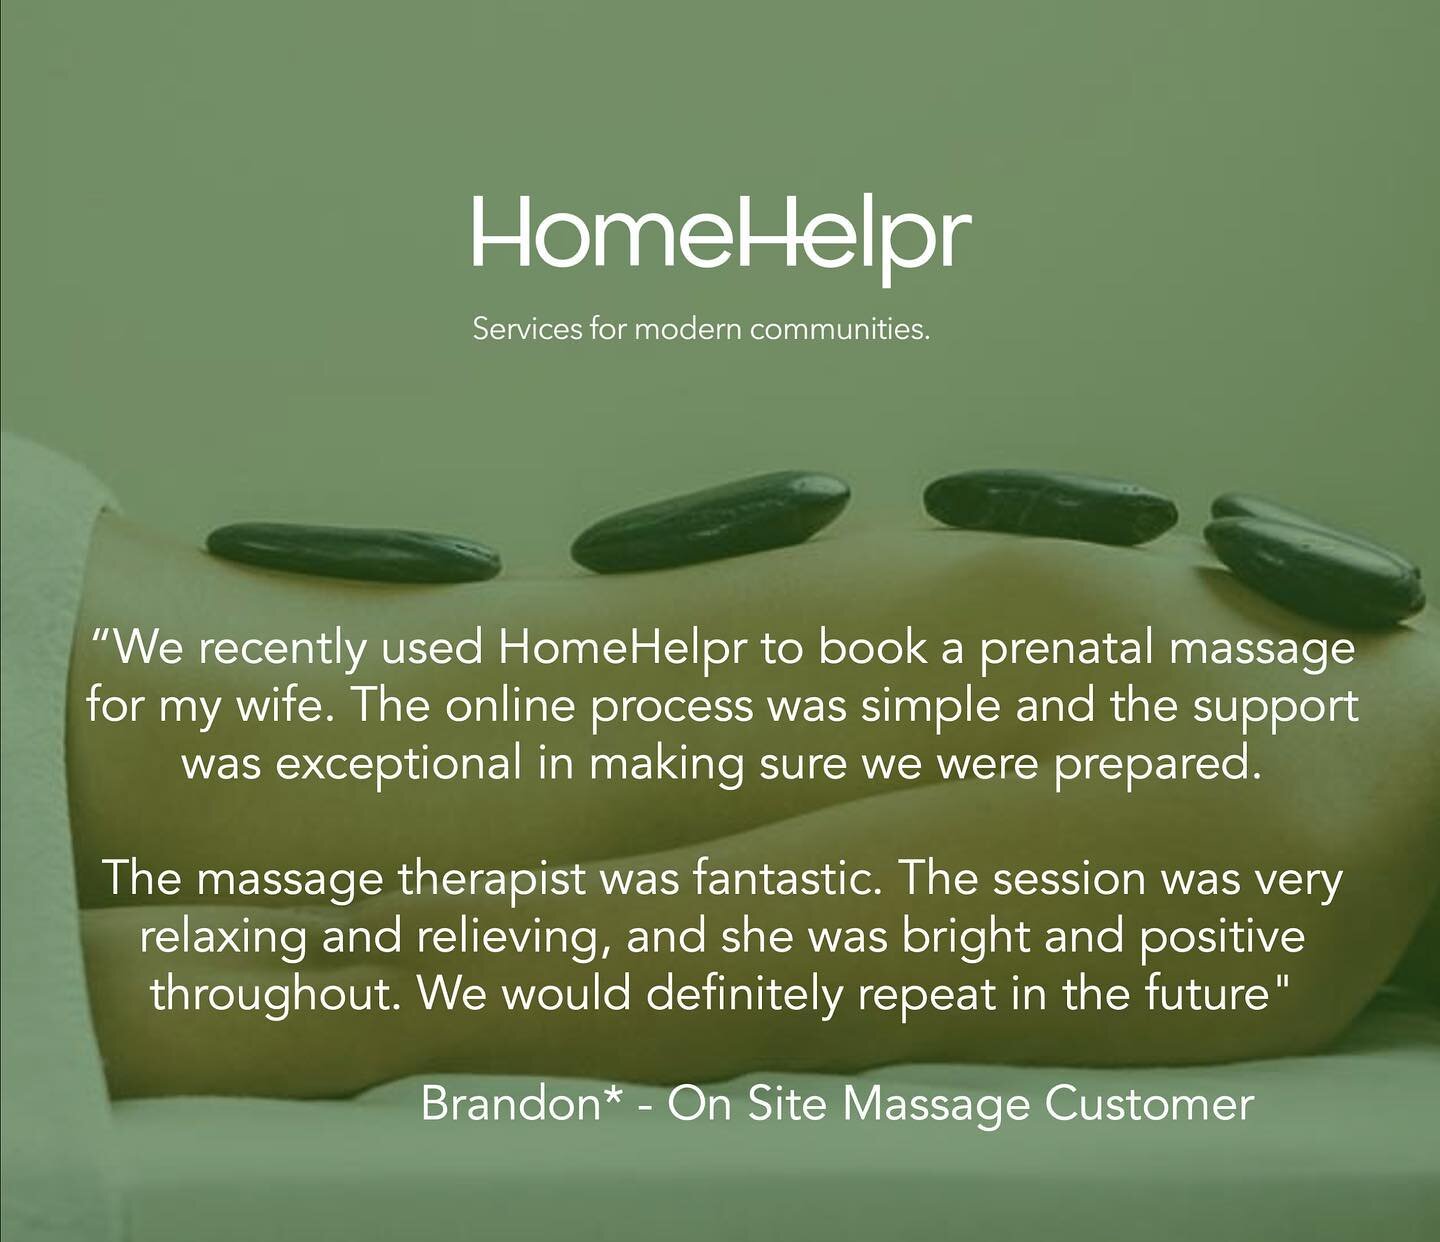 HomeHelpr makes it easy to get your much needed massage right in the comfort of home - not to mention, you are supporting local business when you do! We do all the hard stuff so that you can be confident in your service experience. Brandon&rsquo;s ex